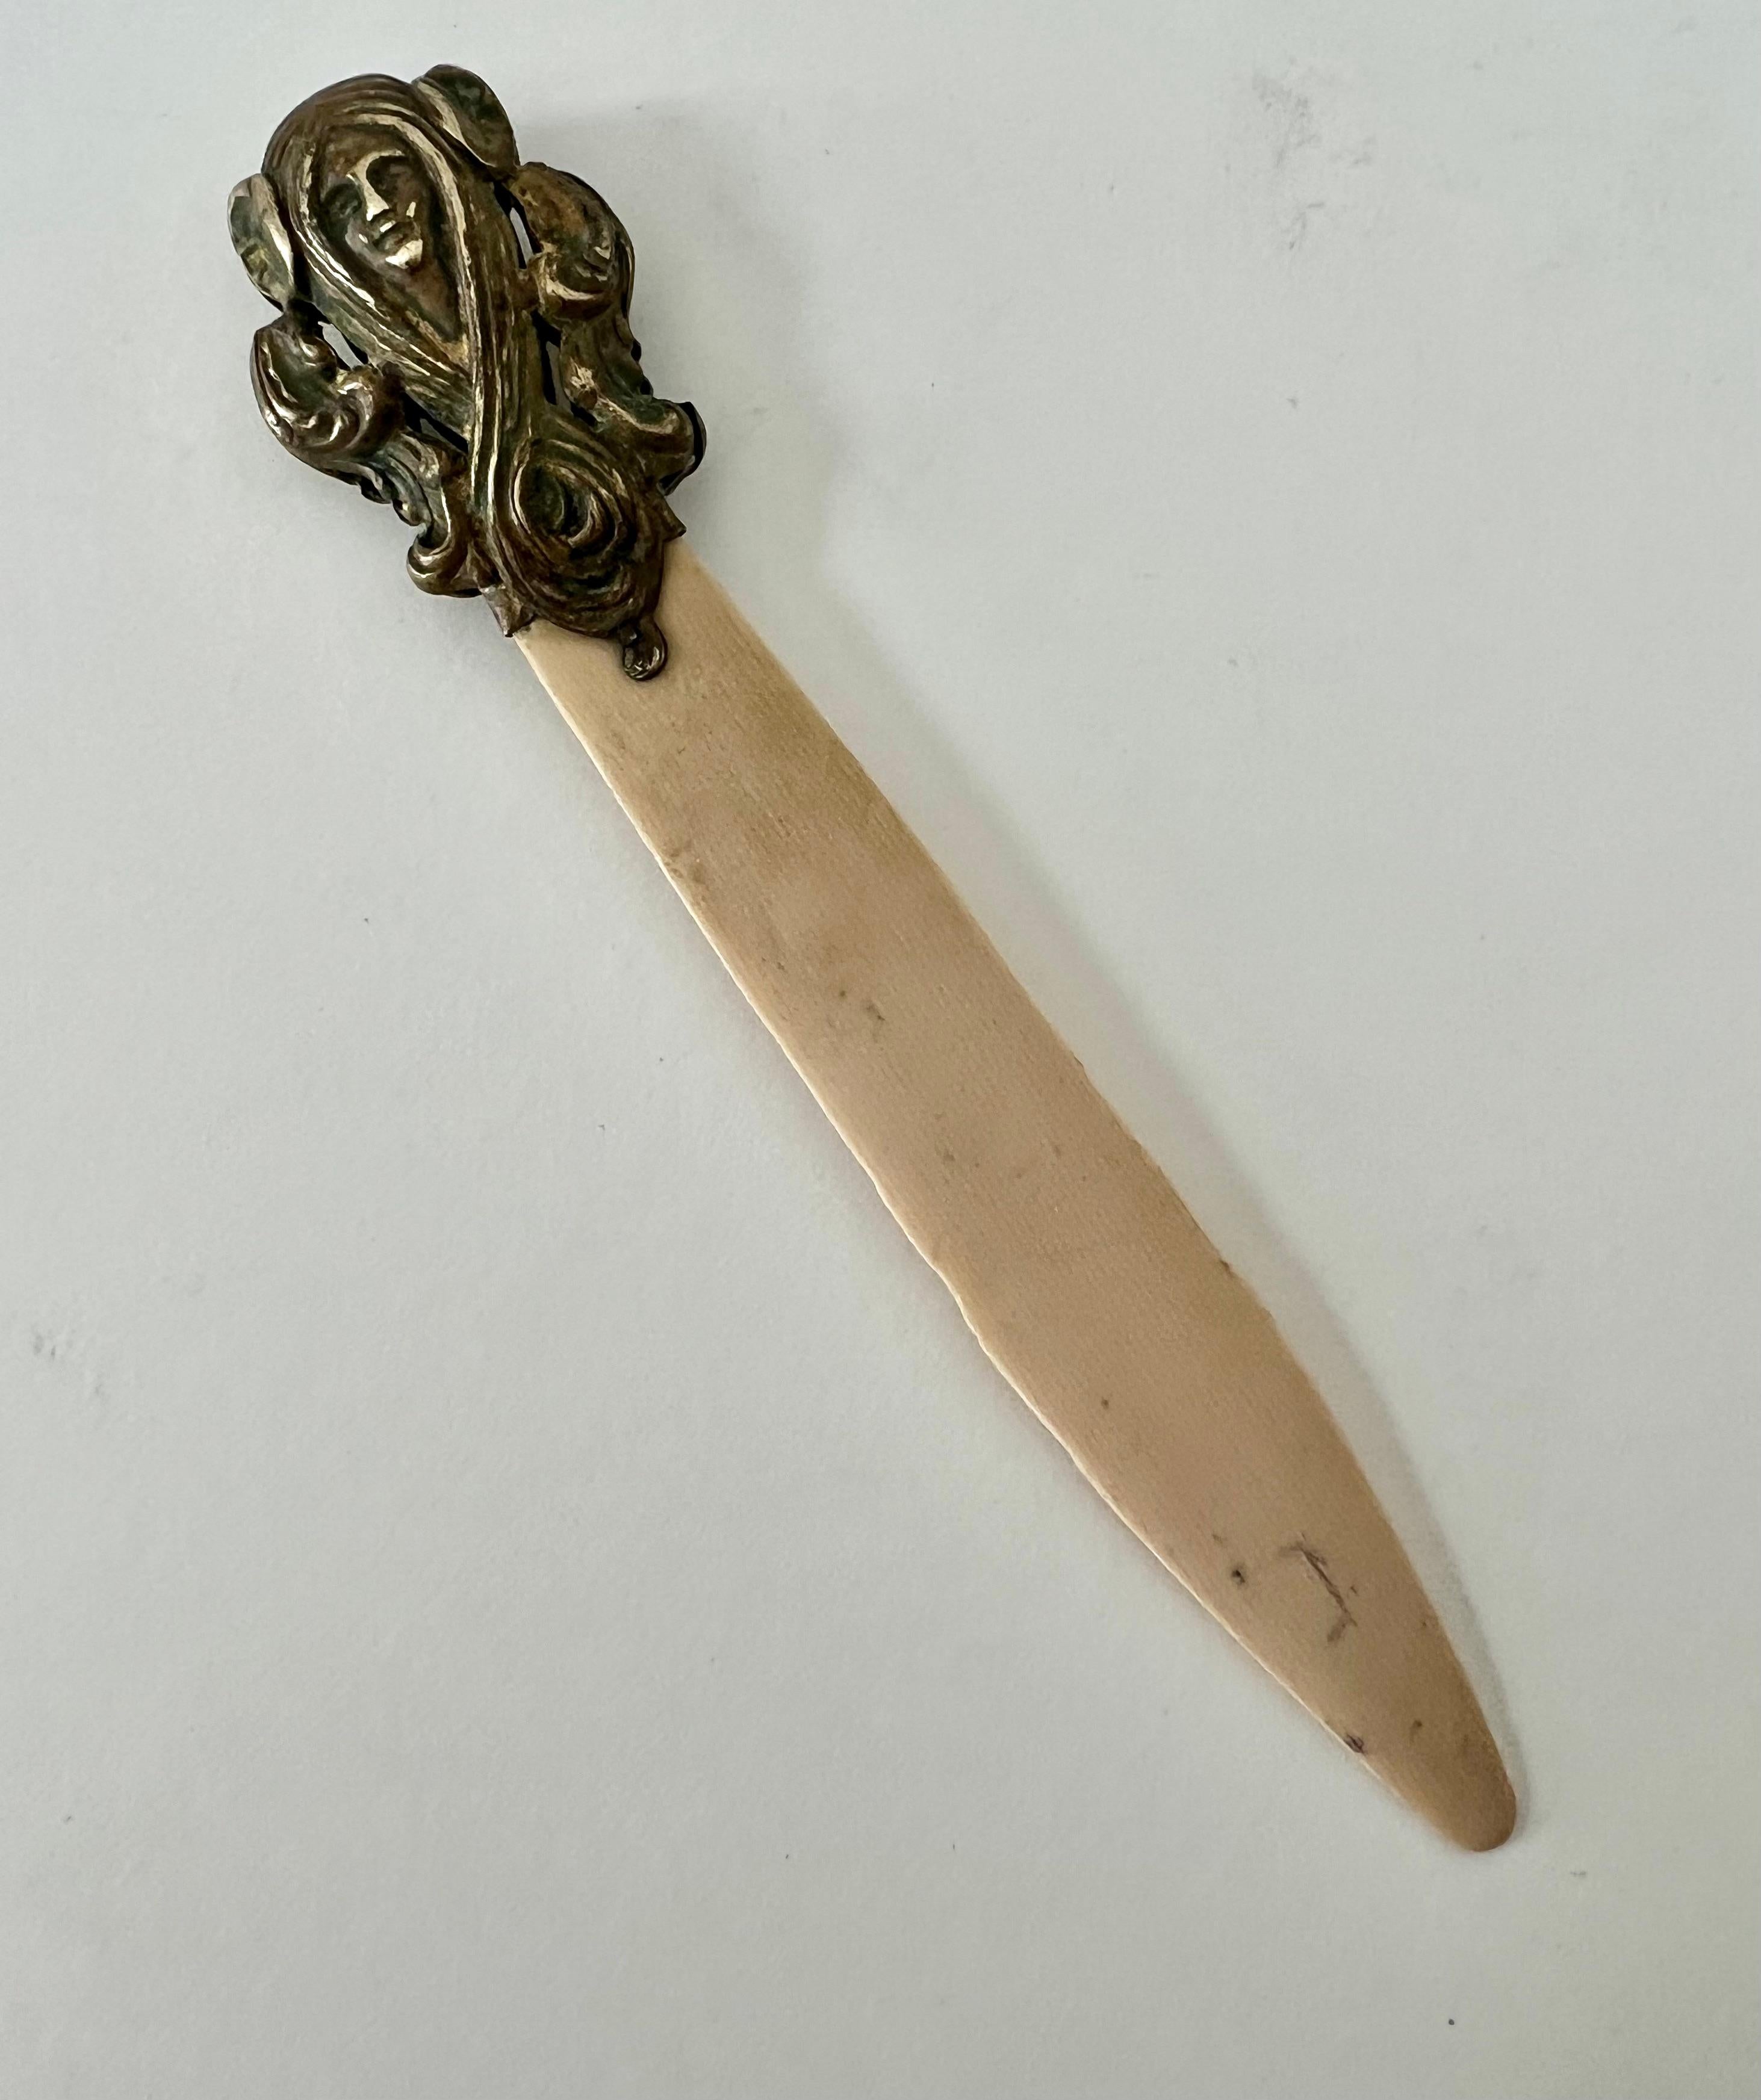 Acquired in Paris, this lovely Brass and bone art nouveau letter opener has a beautiful patina that will give your desk or work space a new sense of sophistication.  While the piece works, it is quite delicate, with a brass decorative top that is